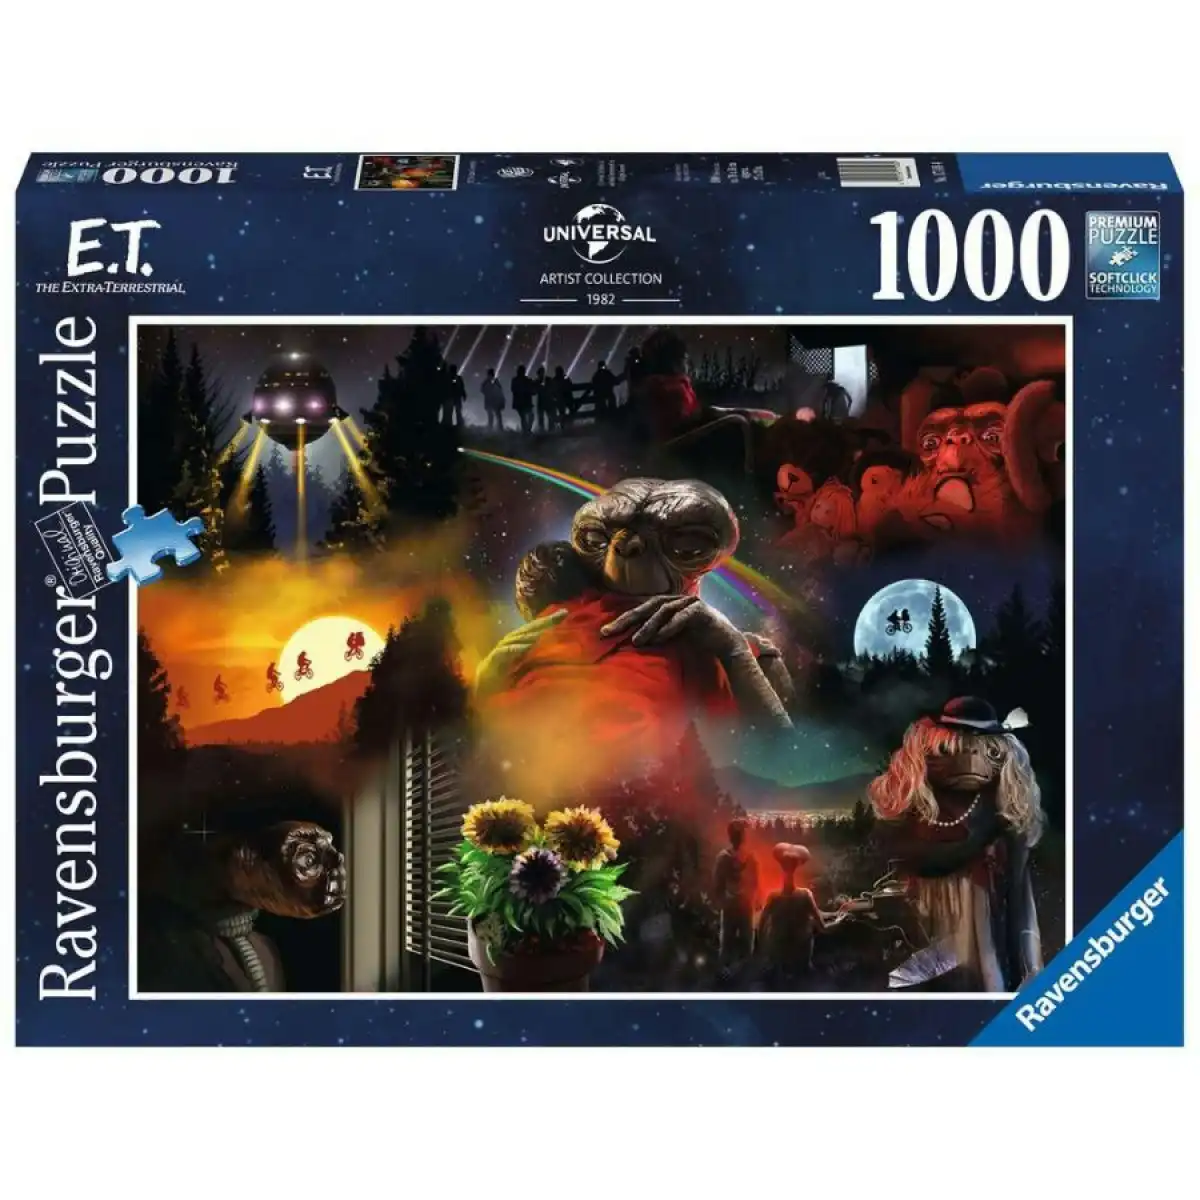 Ravensburger - E.t Artist Collection The Extra Terrestrial Jigsaw Puzzle 1000 Pieces